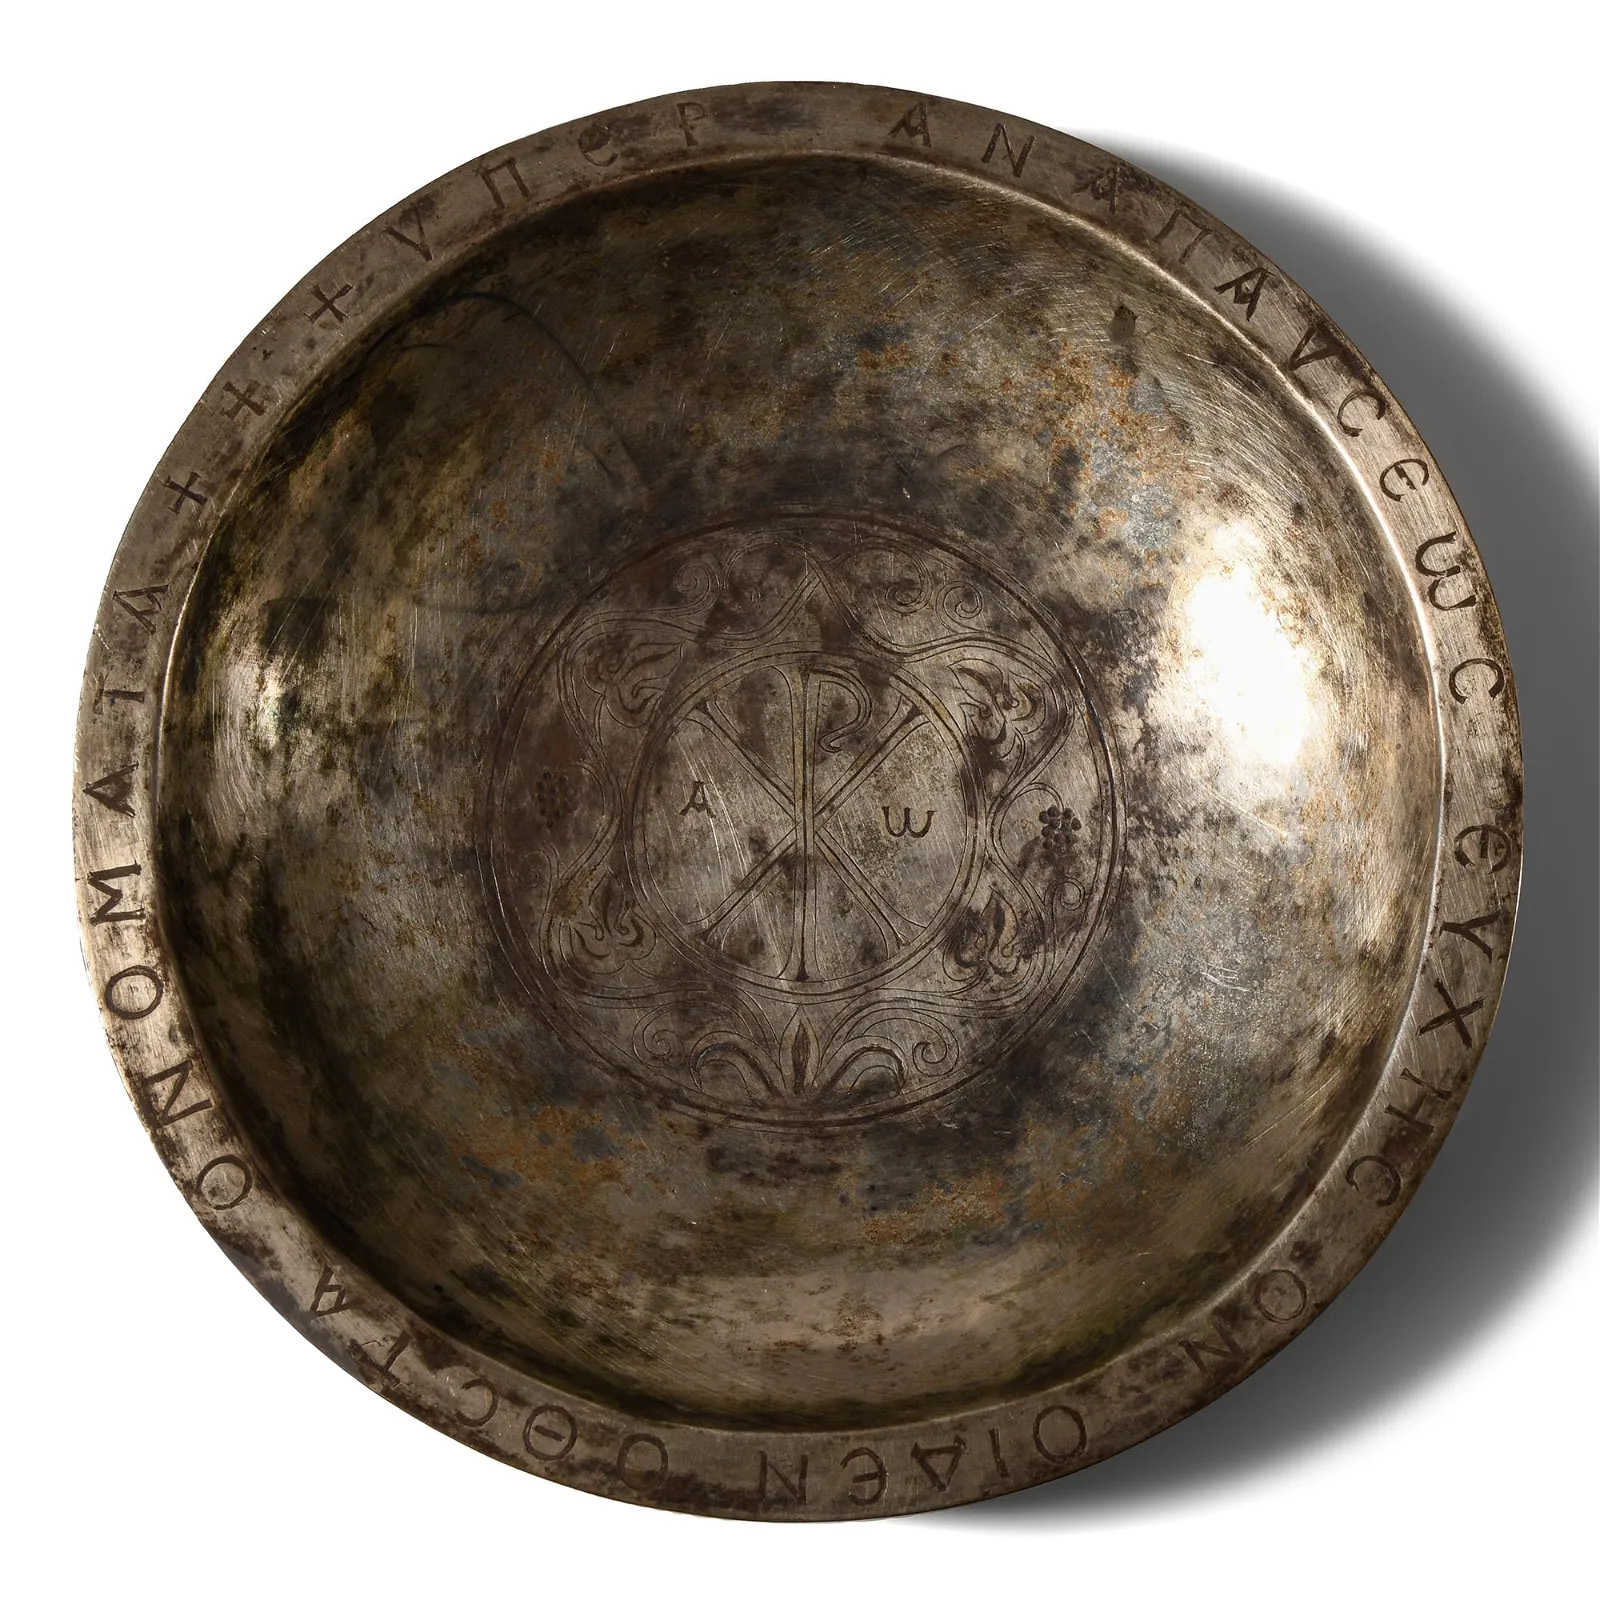 Byzantine silver offering dish from the 11th or 12th century, estimated at £20,000-£30,000 ($25,135-$37,700) at Timeline Auctions.